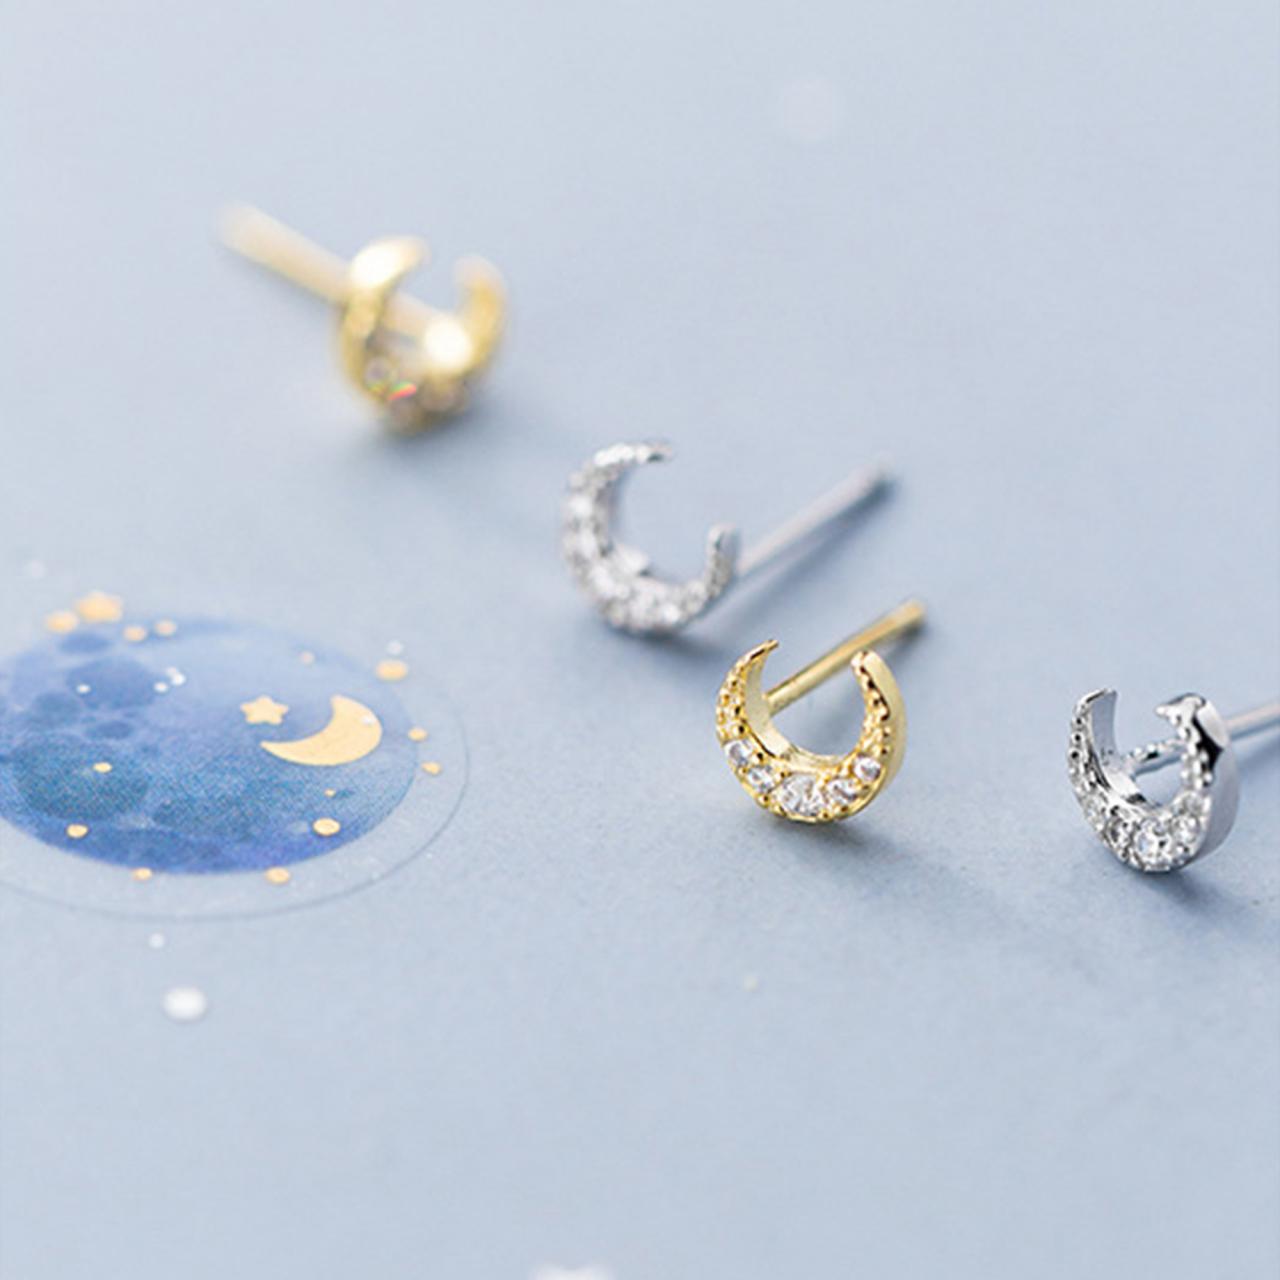 Sterling Silver Cz Pave Moon Ear Post, Moon Earrings Stud, Moon Ear Stud, Moon Earrings